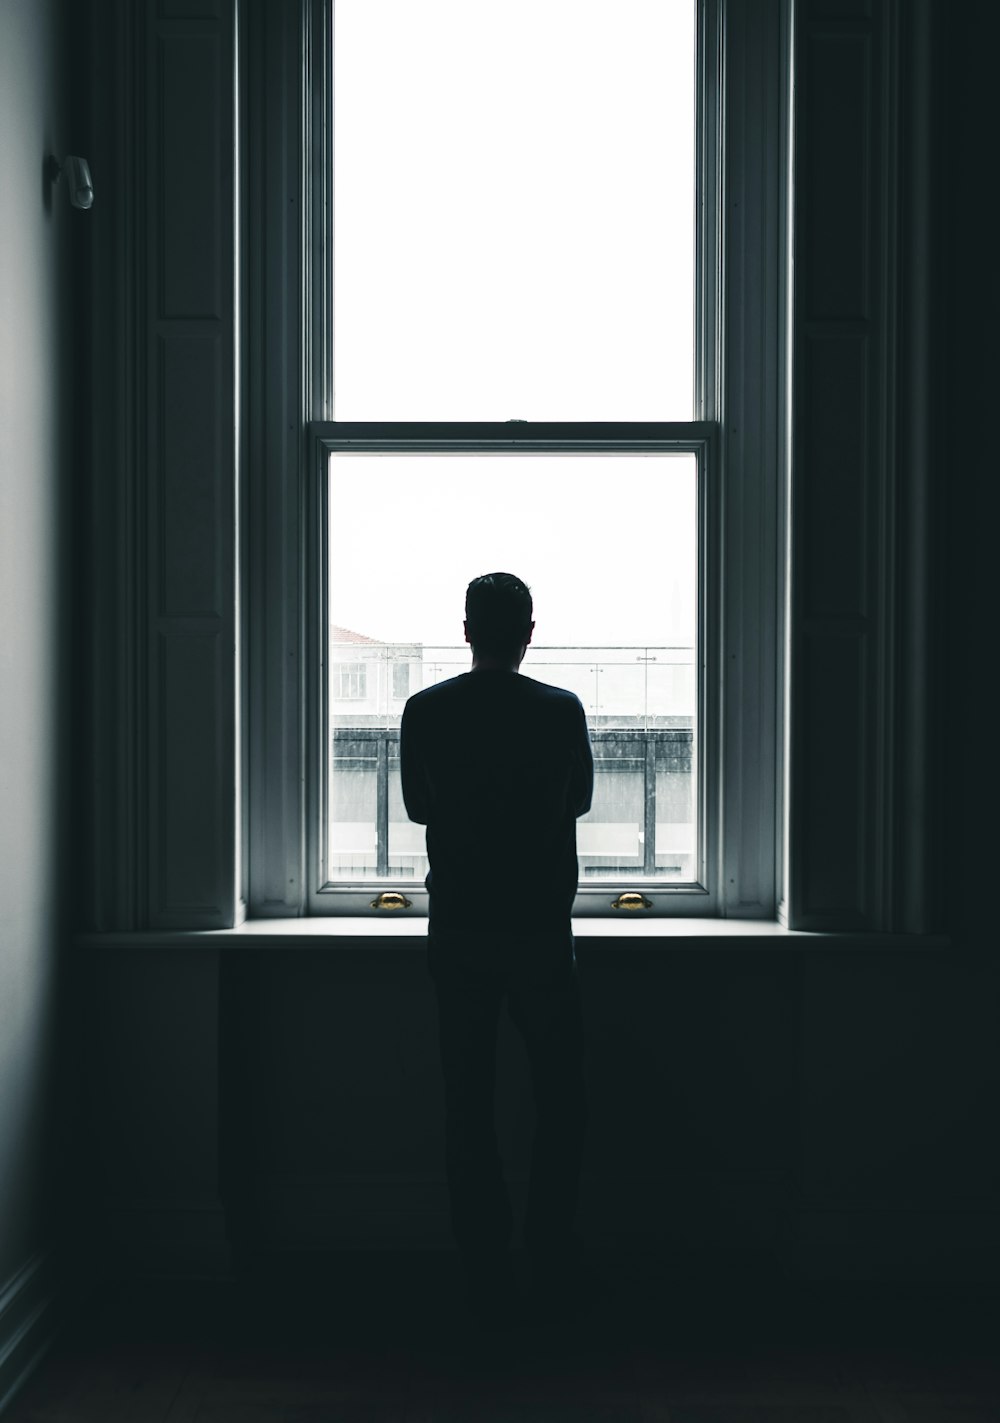 HD wallpaper: silhouette photography of person in front of window